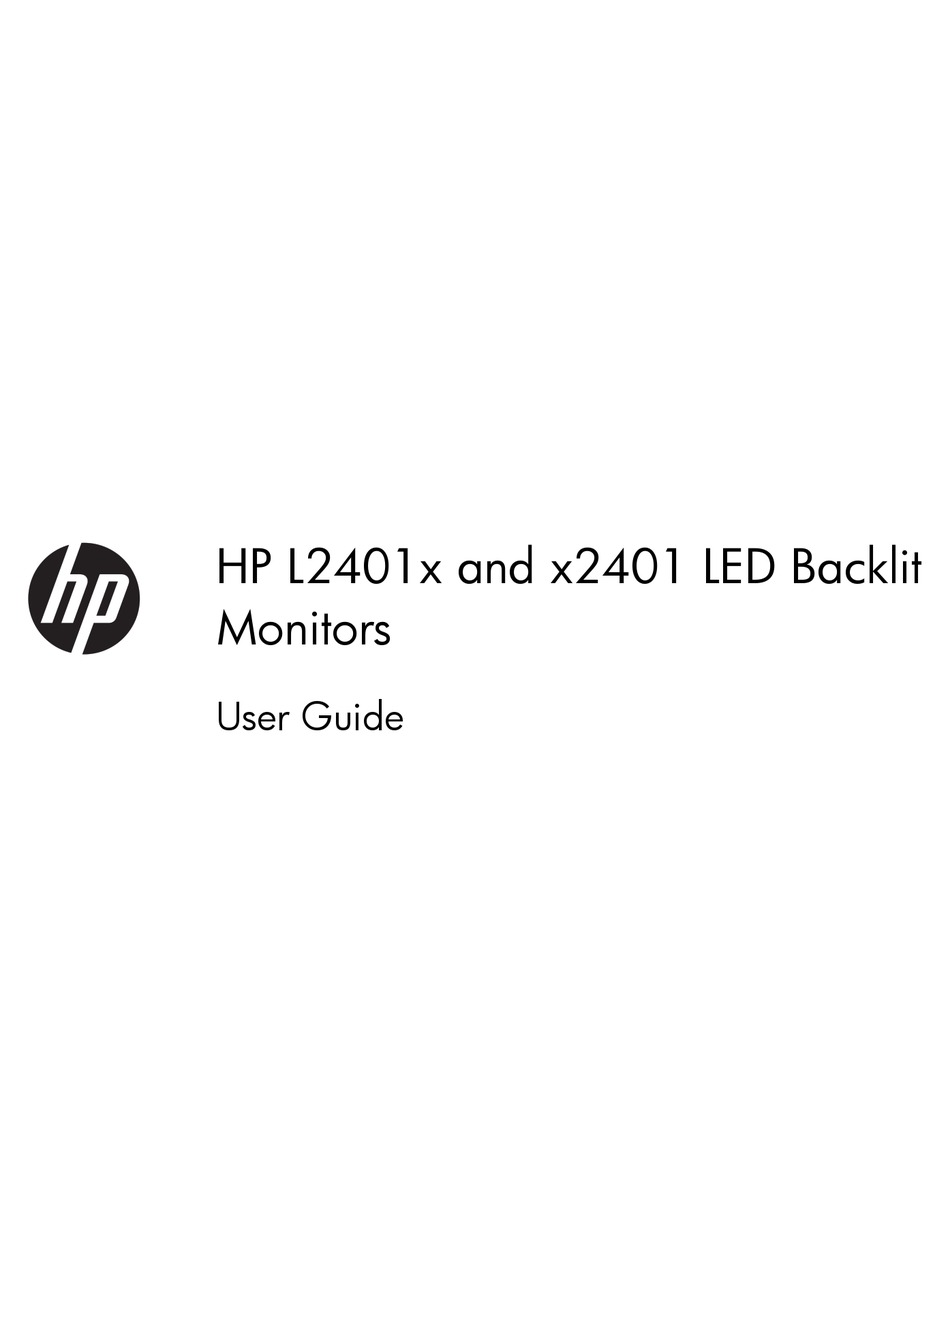 Installing The Vesa Adapter Plate Onto The Monitor - HP L2401x